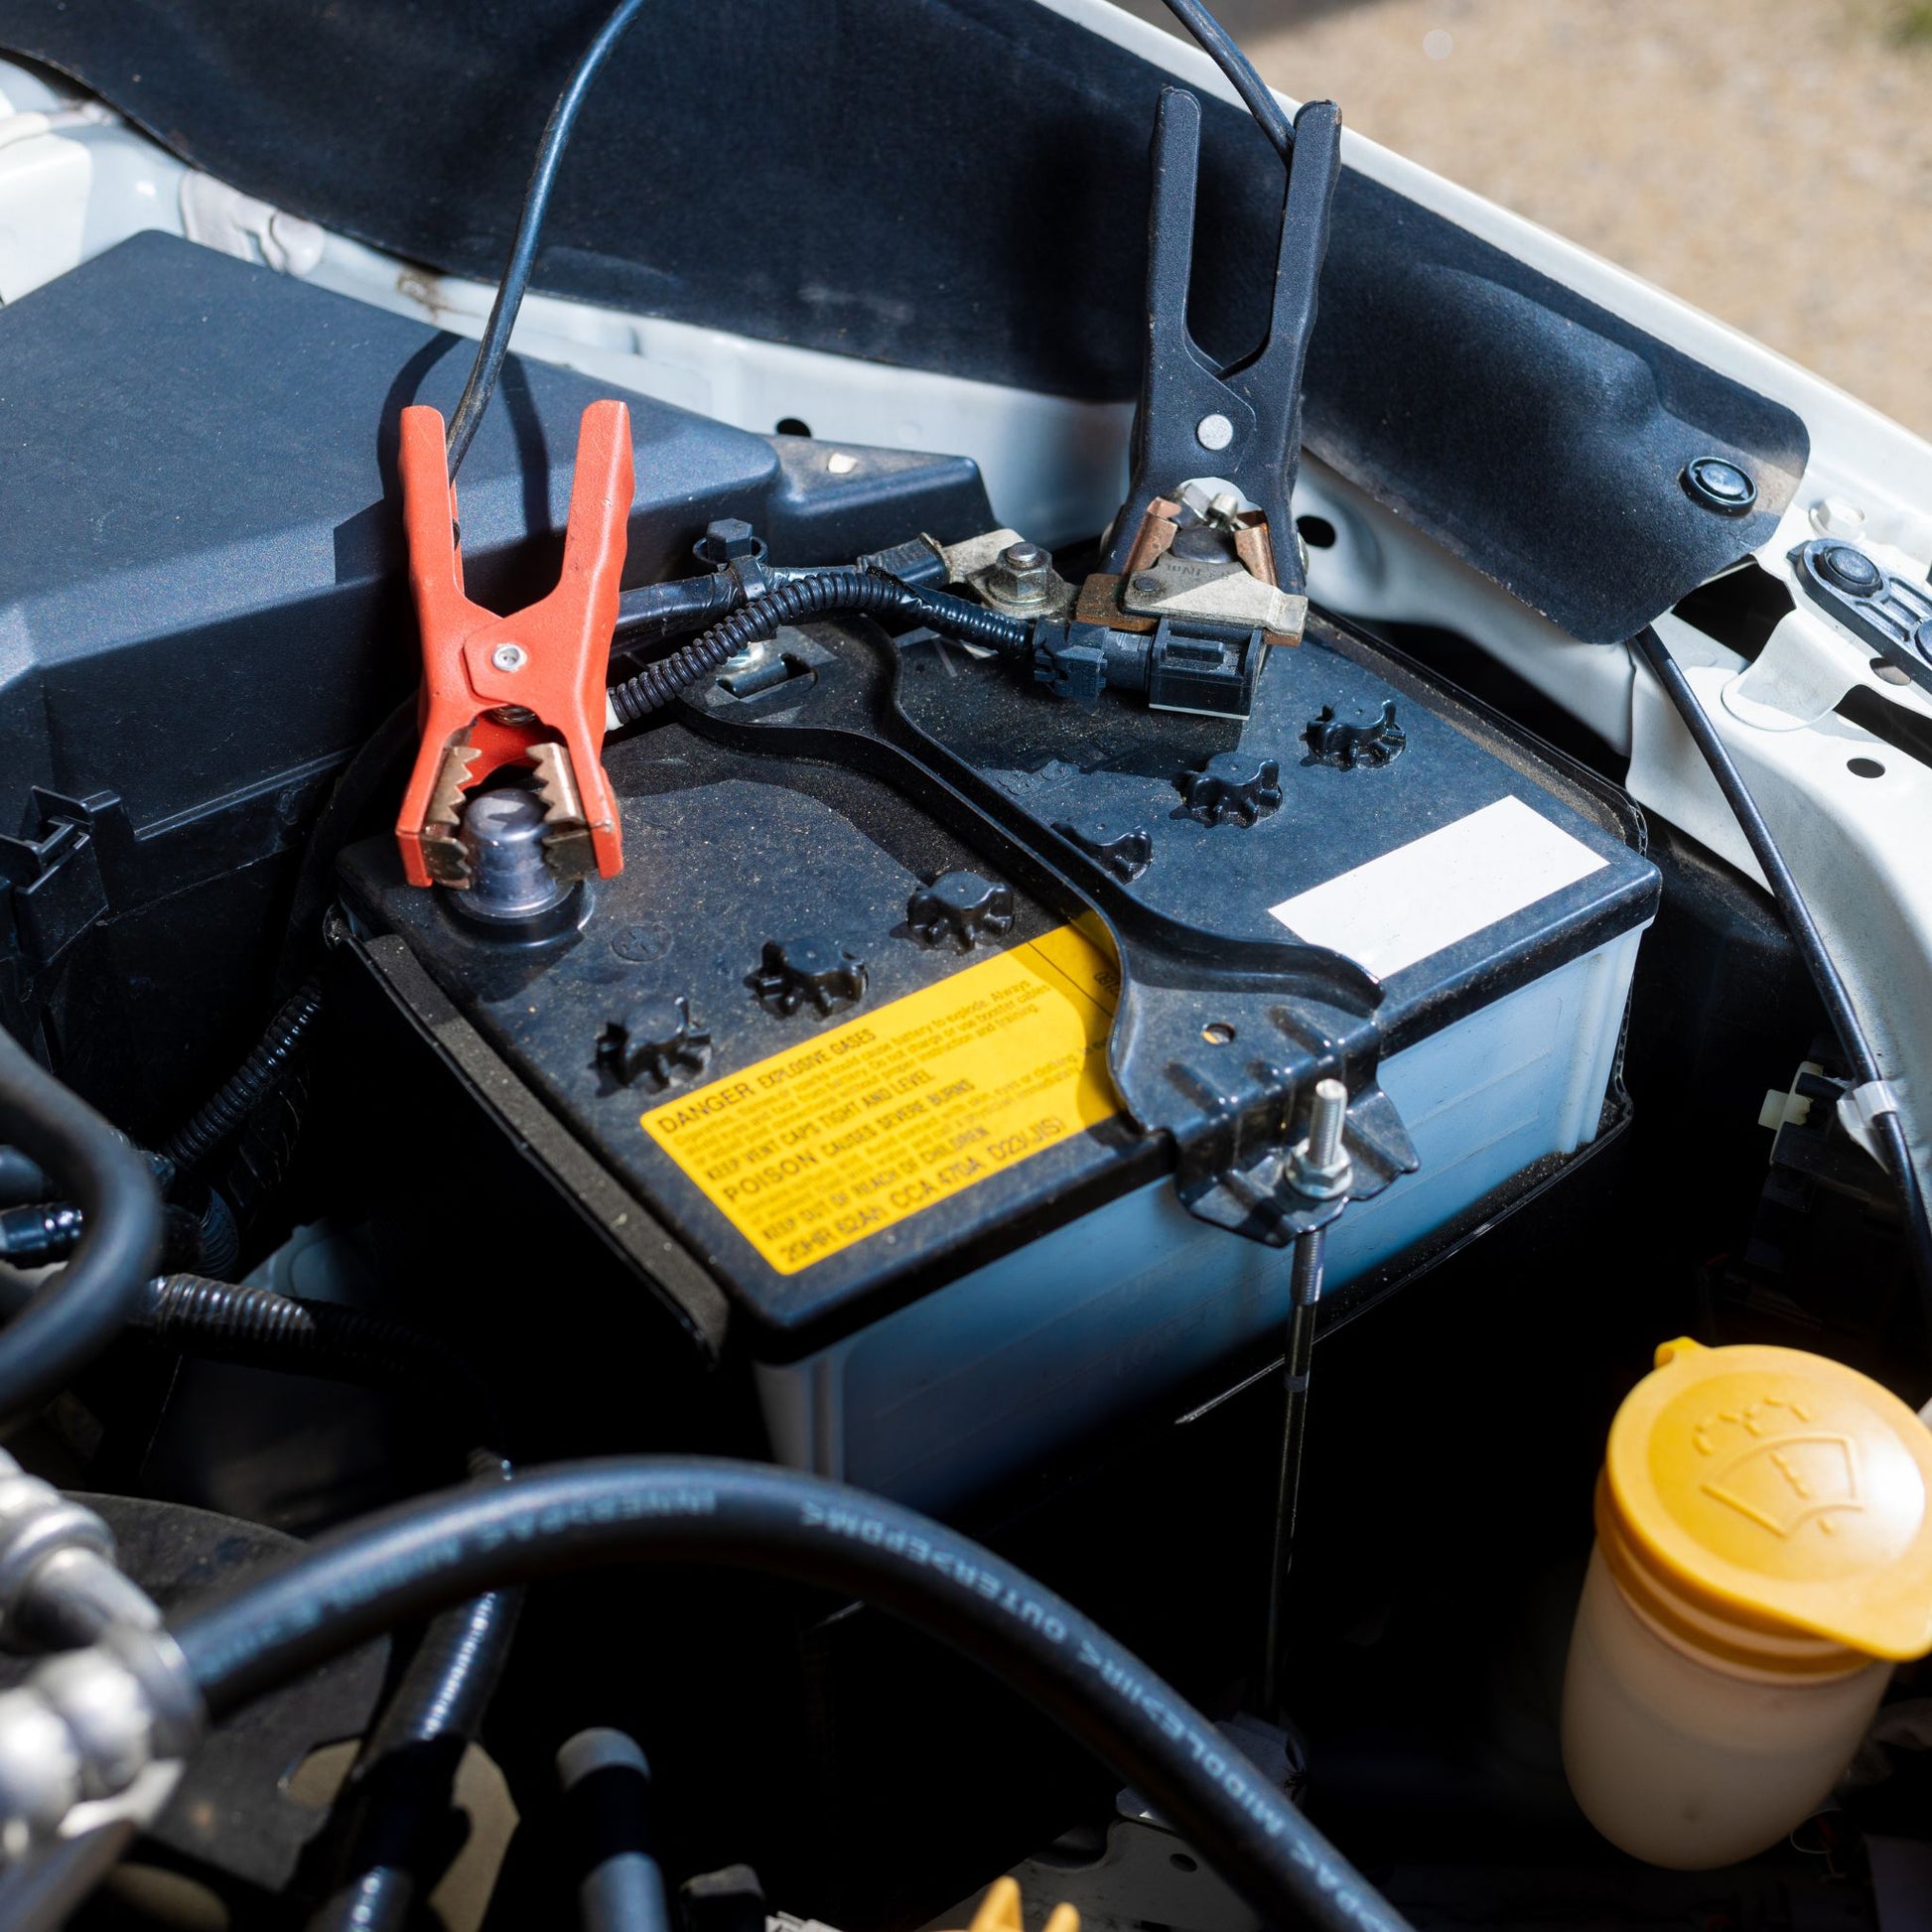 Battery Boost Service: assisting a customer who's car battery is dead.